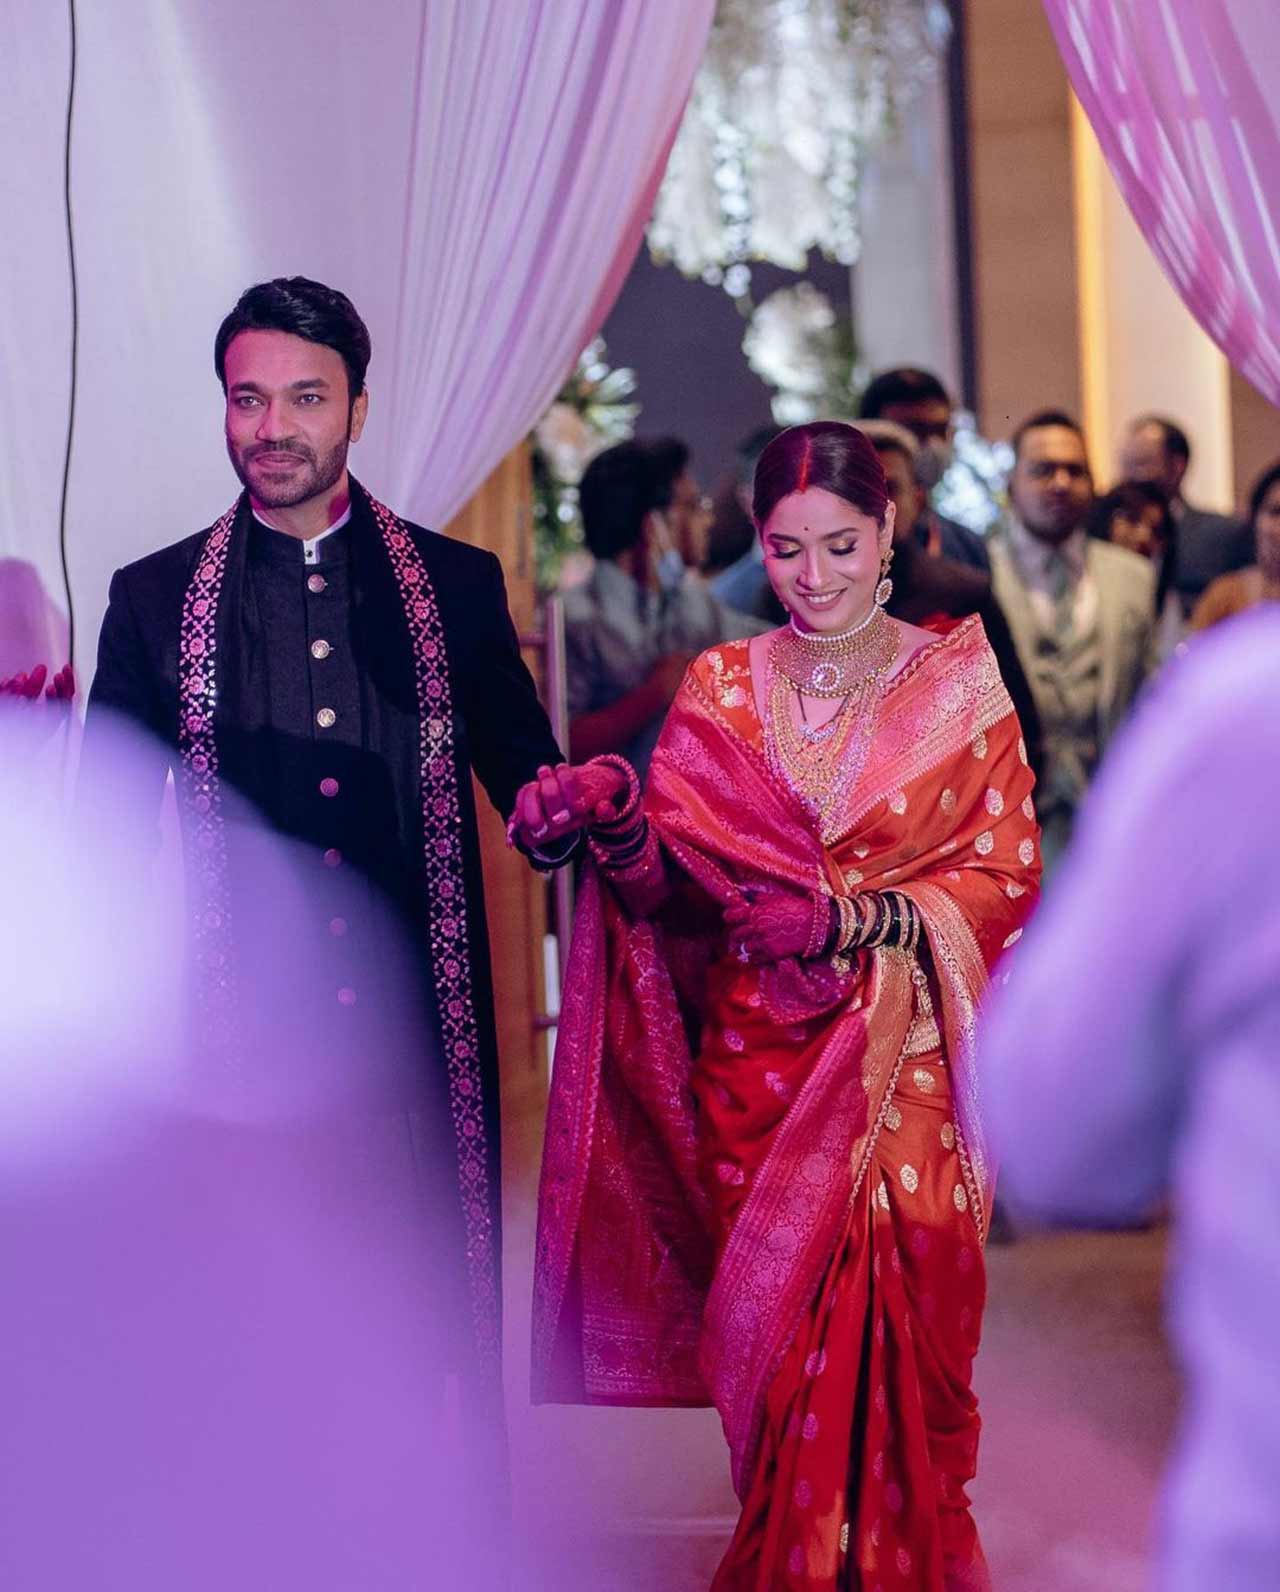 Vicky Jain showed off his dapper side in a black sherwani, and the groom looked extremely well-dressed. The duo tied the knot on December 14, and the pictures took over the internet within no time! Their 'pheras' and 'varmala' video also went viral on social media.